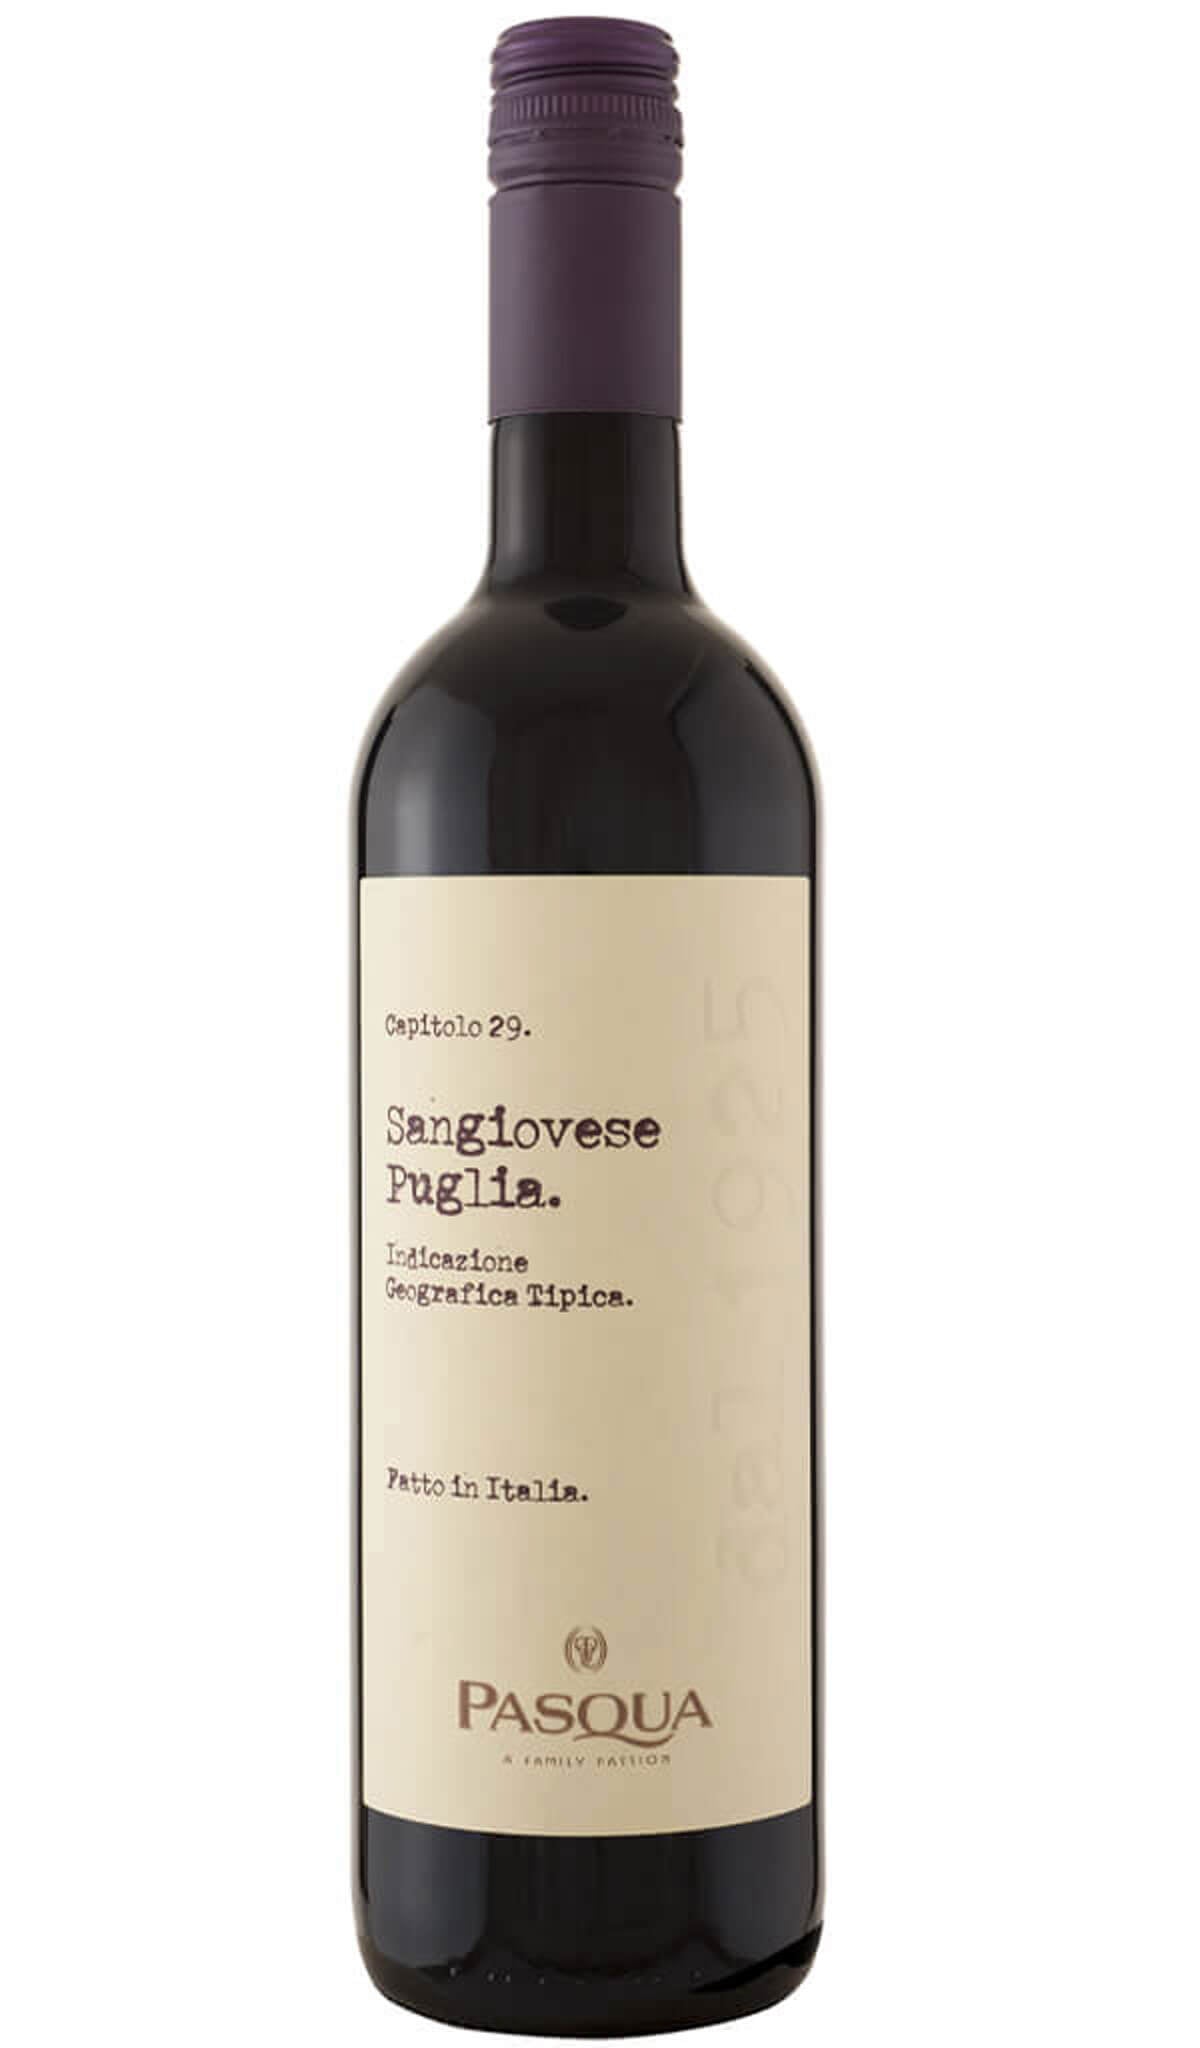 Find out more or buy Pasqua Sangiovese Puglia 2022 (Italy) online at Wine Sellers Direct - Australia’s independent liquor specialists.